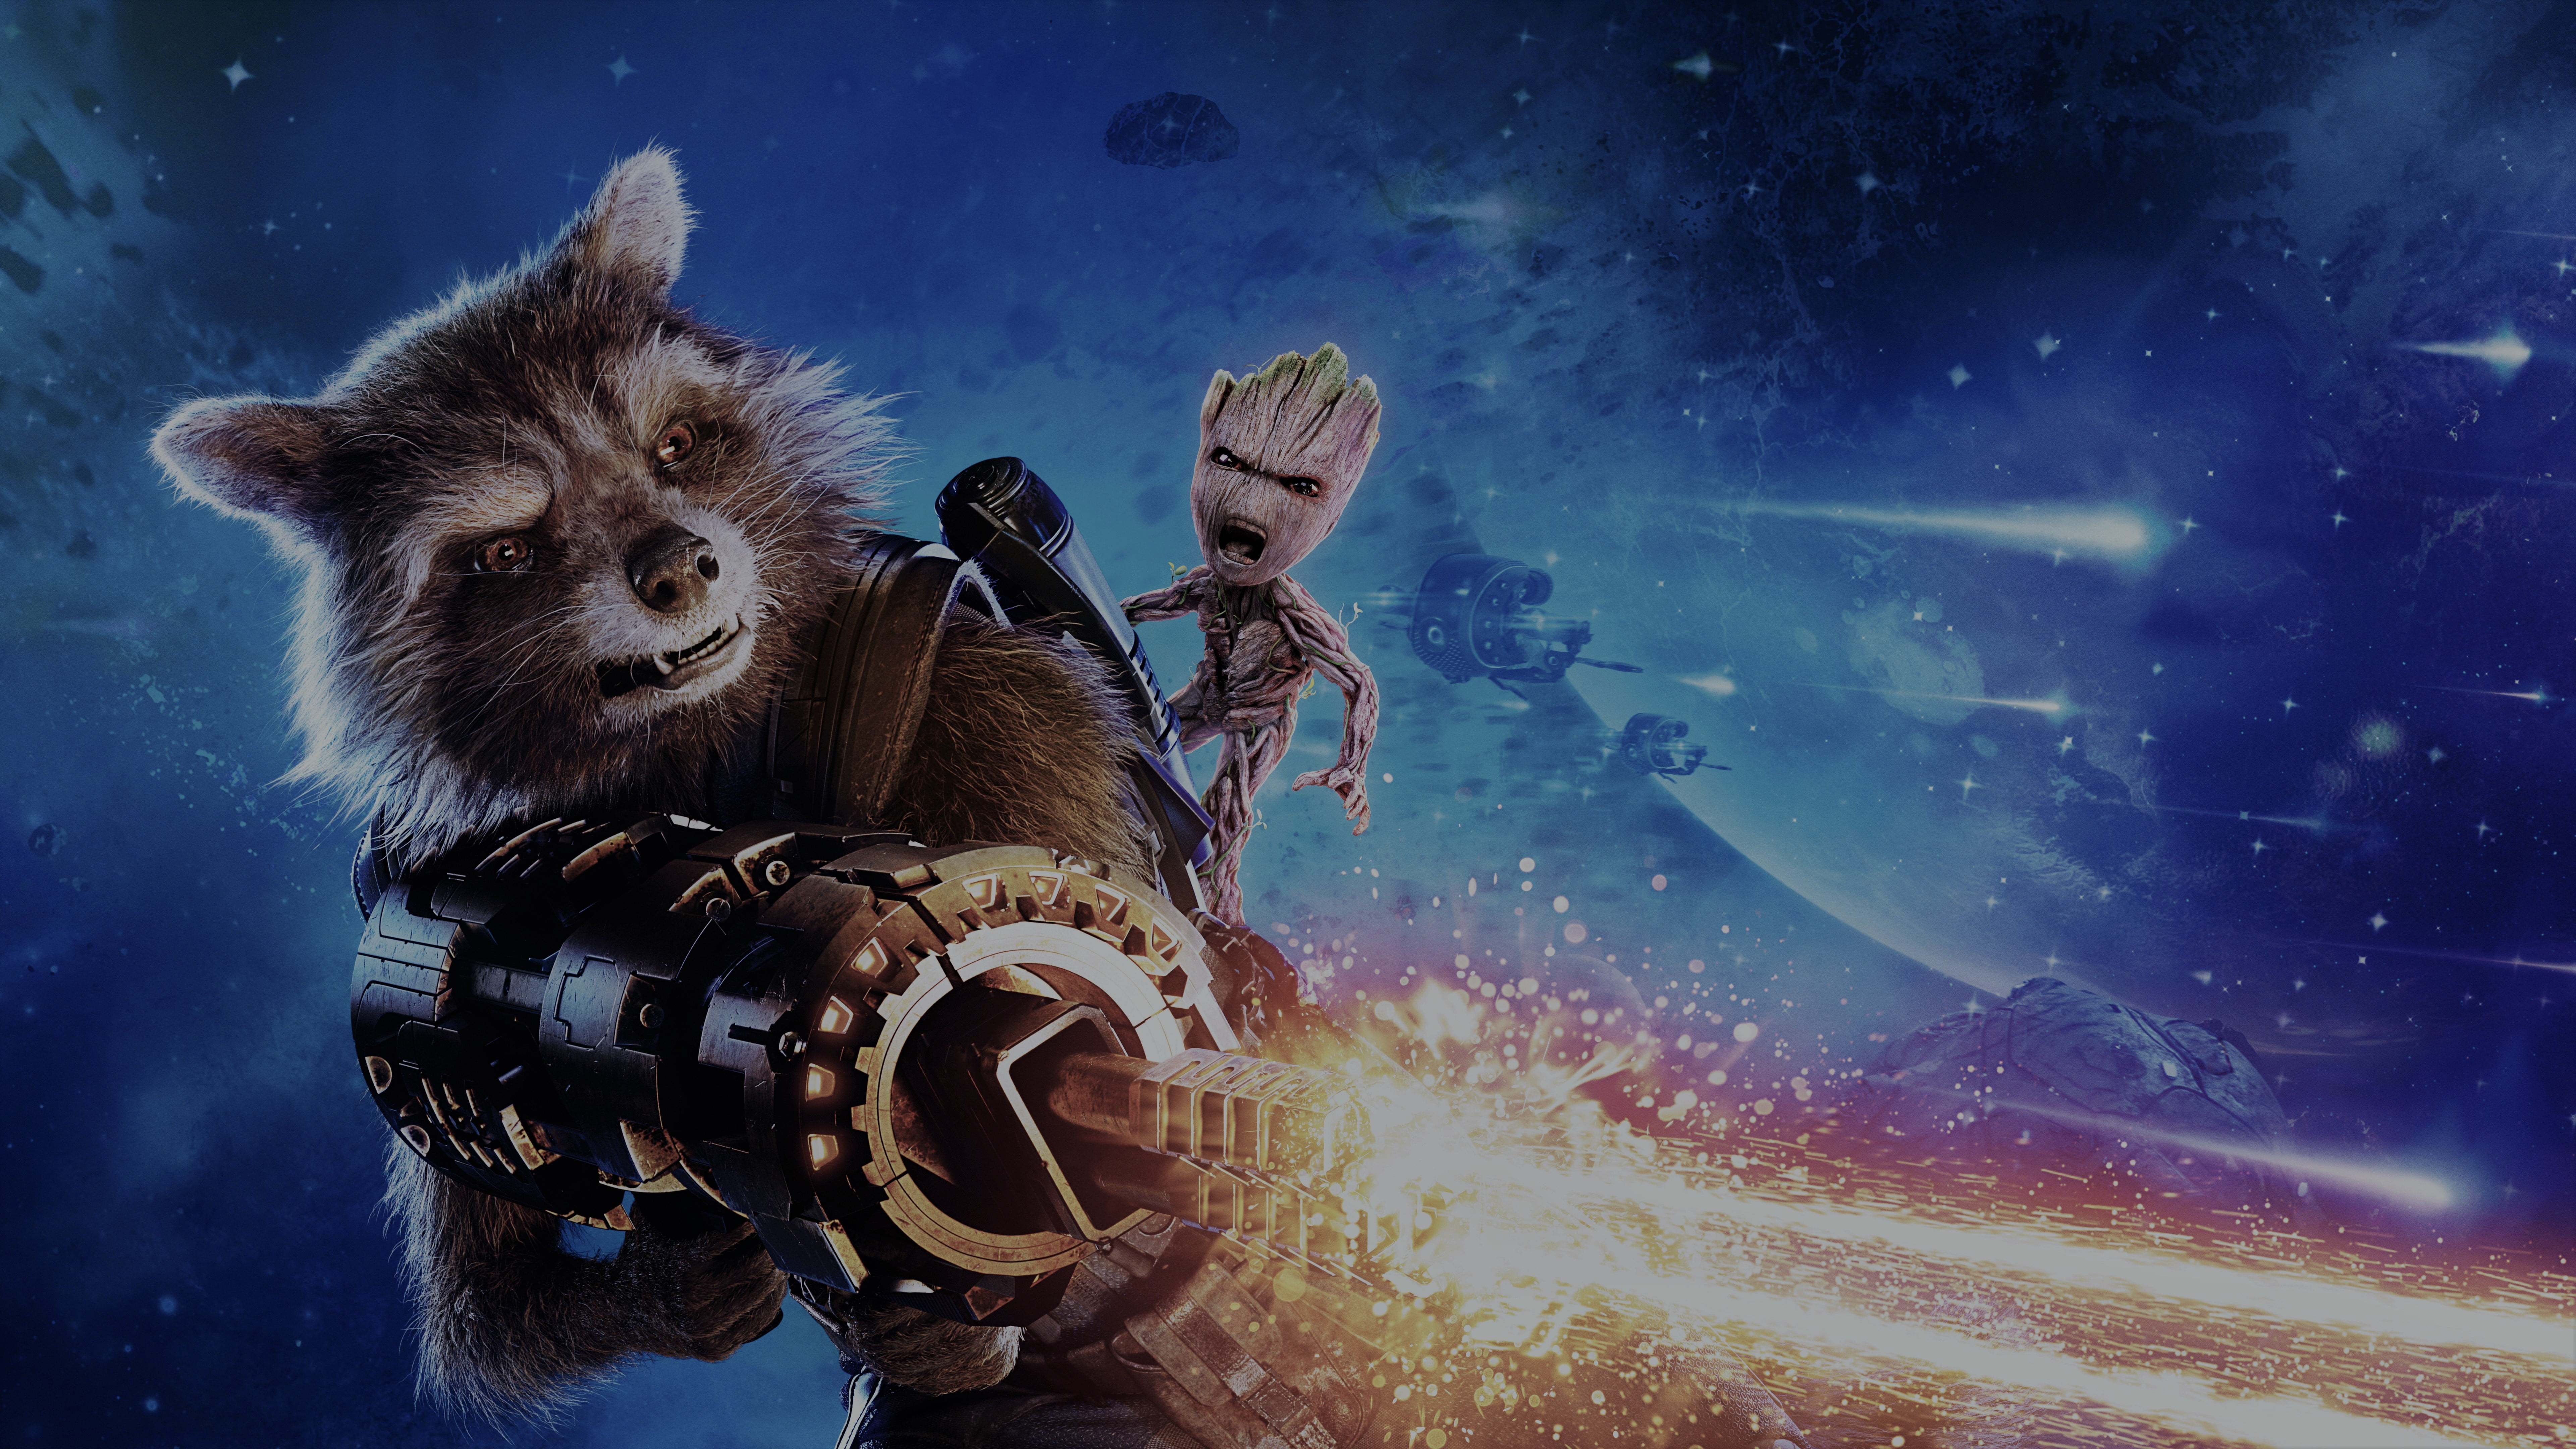 Rocket Raccoon and Baby Groot illustration, Guardians of the Galaxy Vol. 2, Marvel Cinematic Universe, movies, superhero